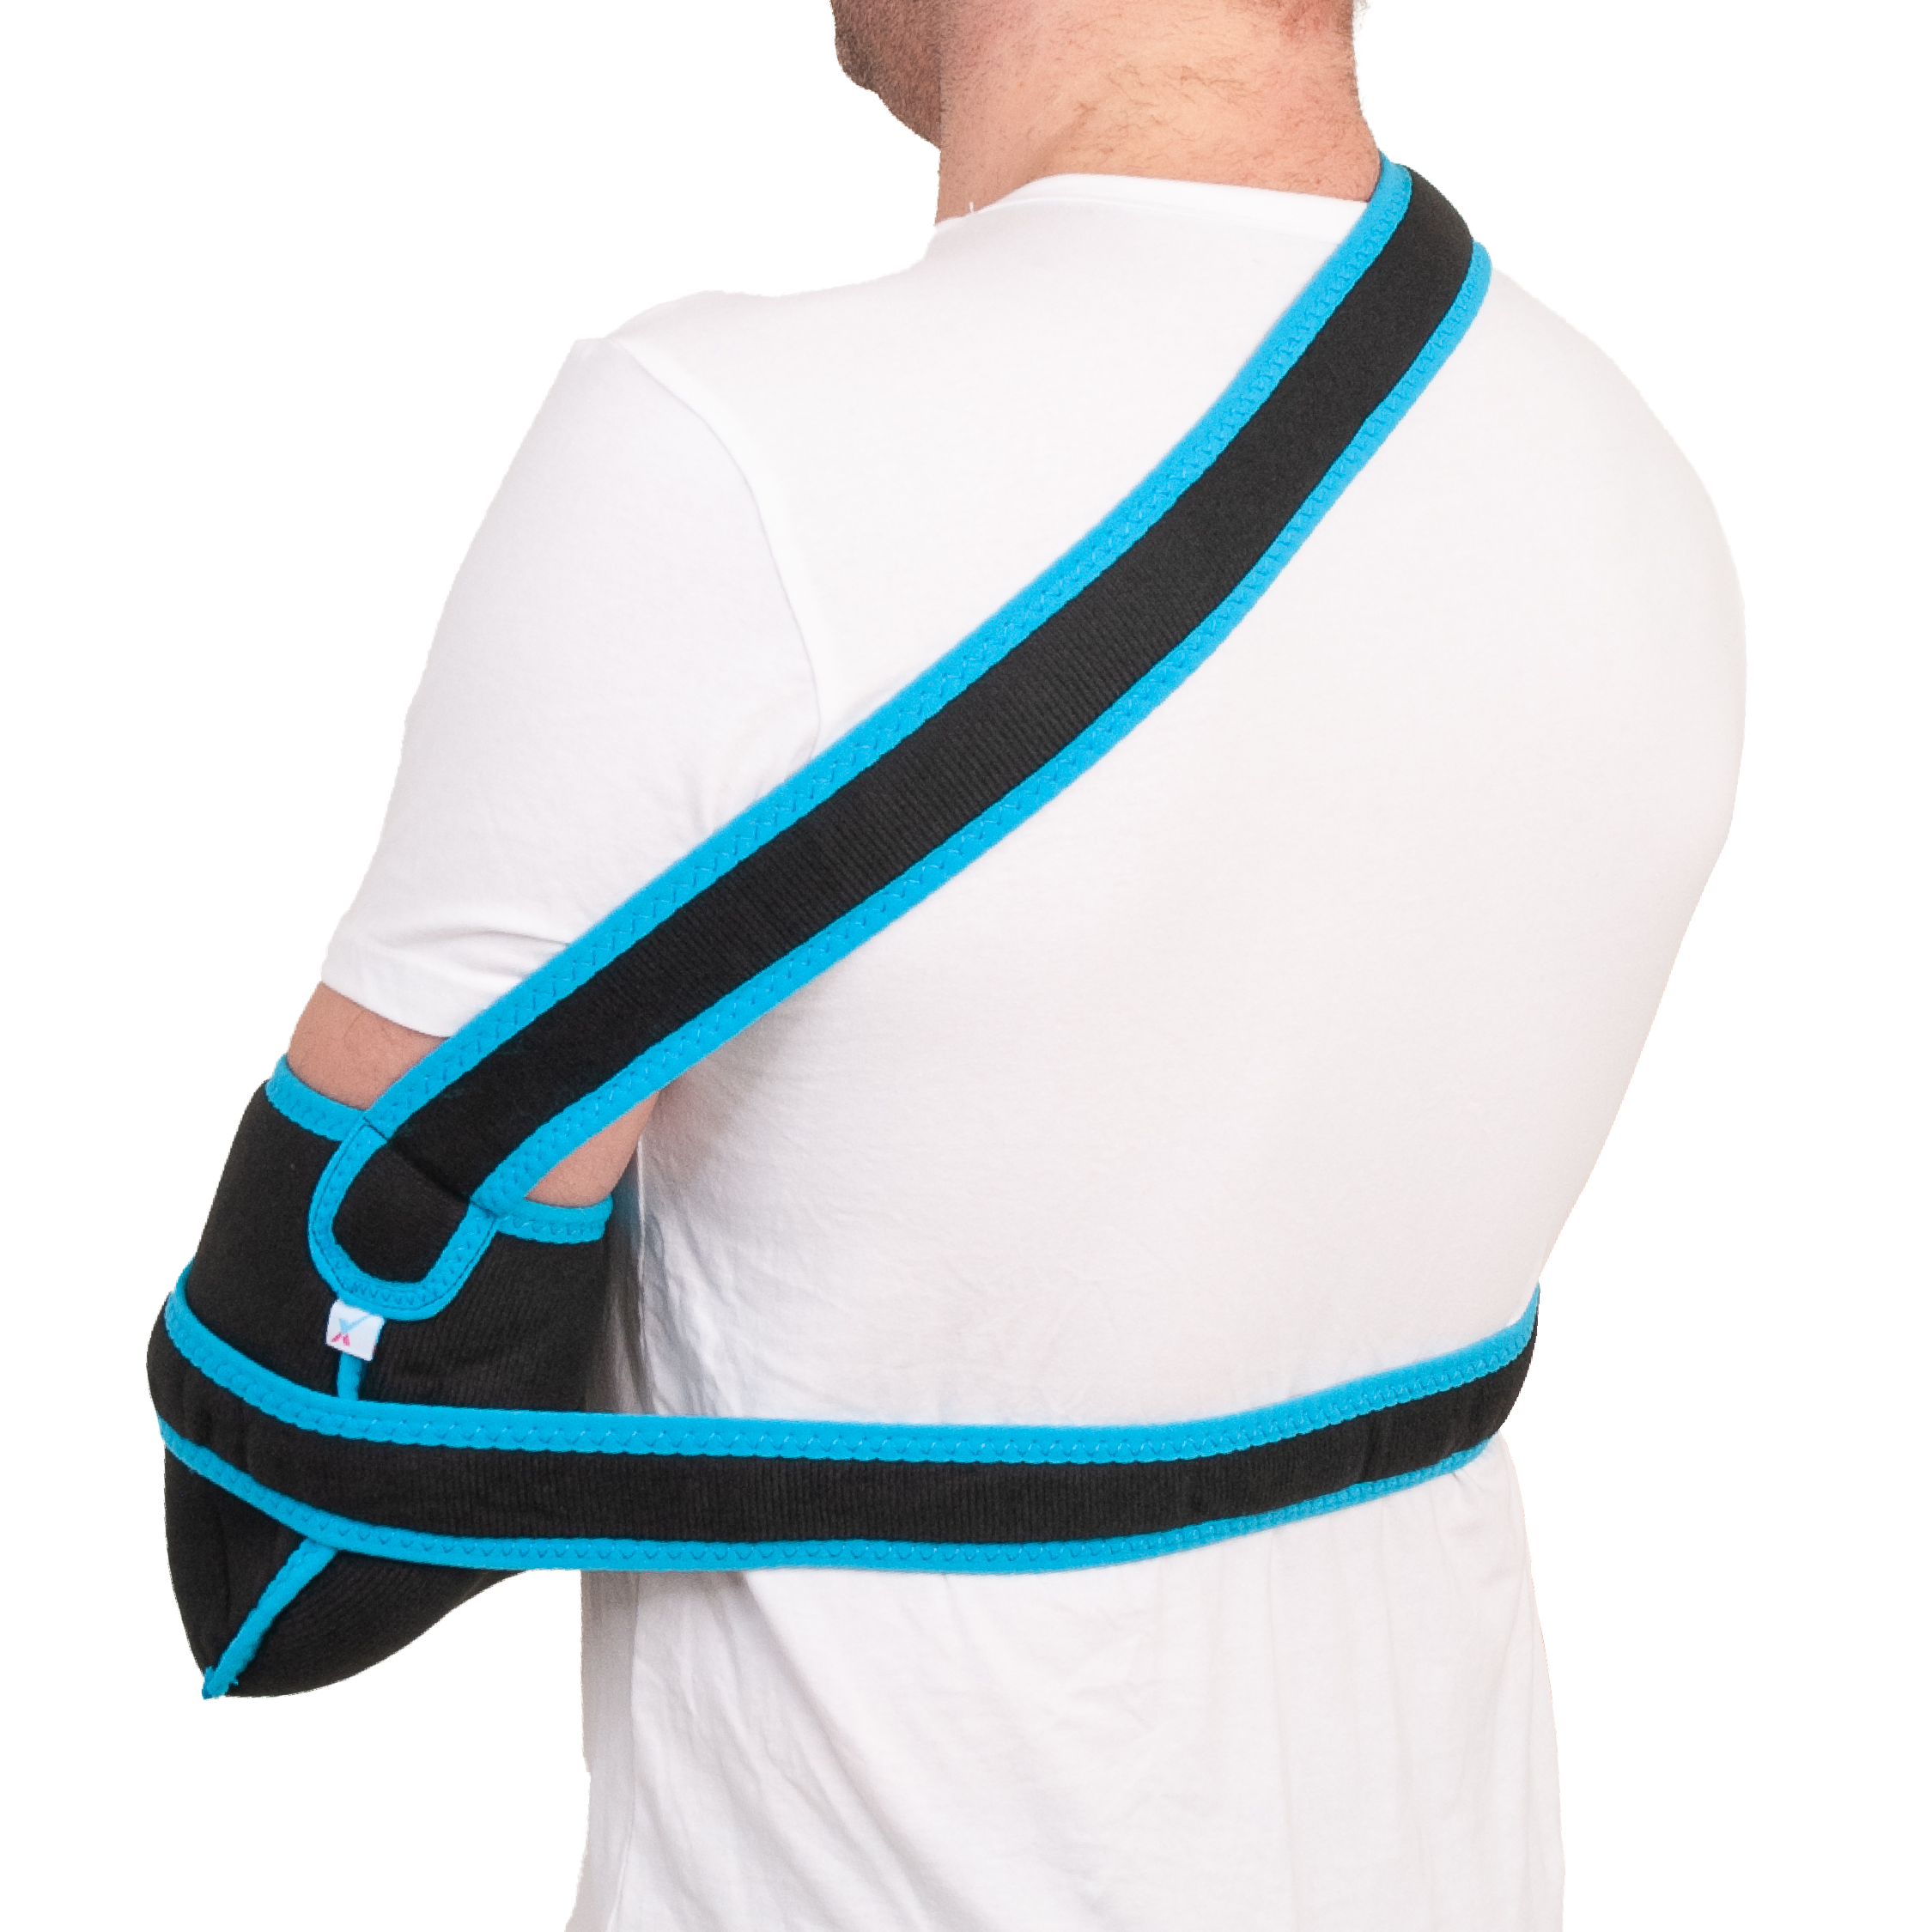 Universal Foam Sling, Lightweight and breathable, Orthotix